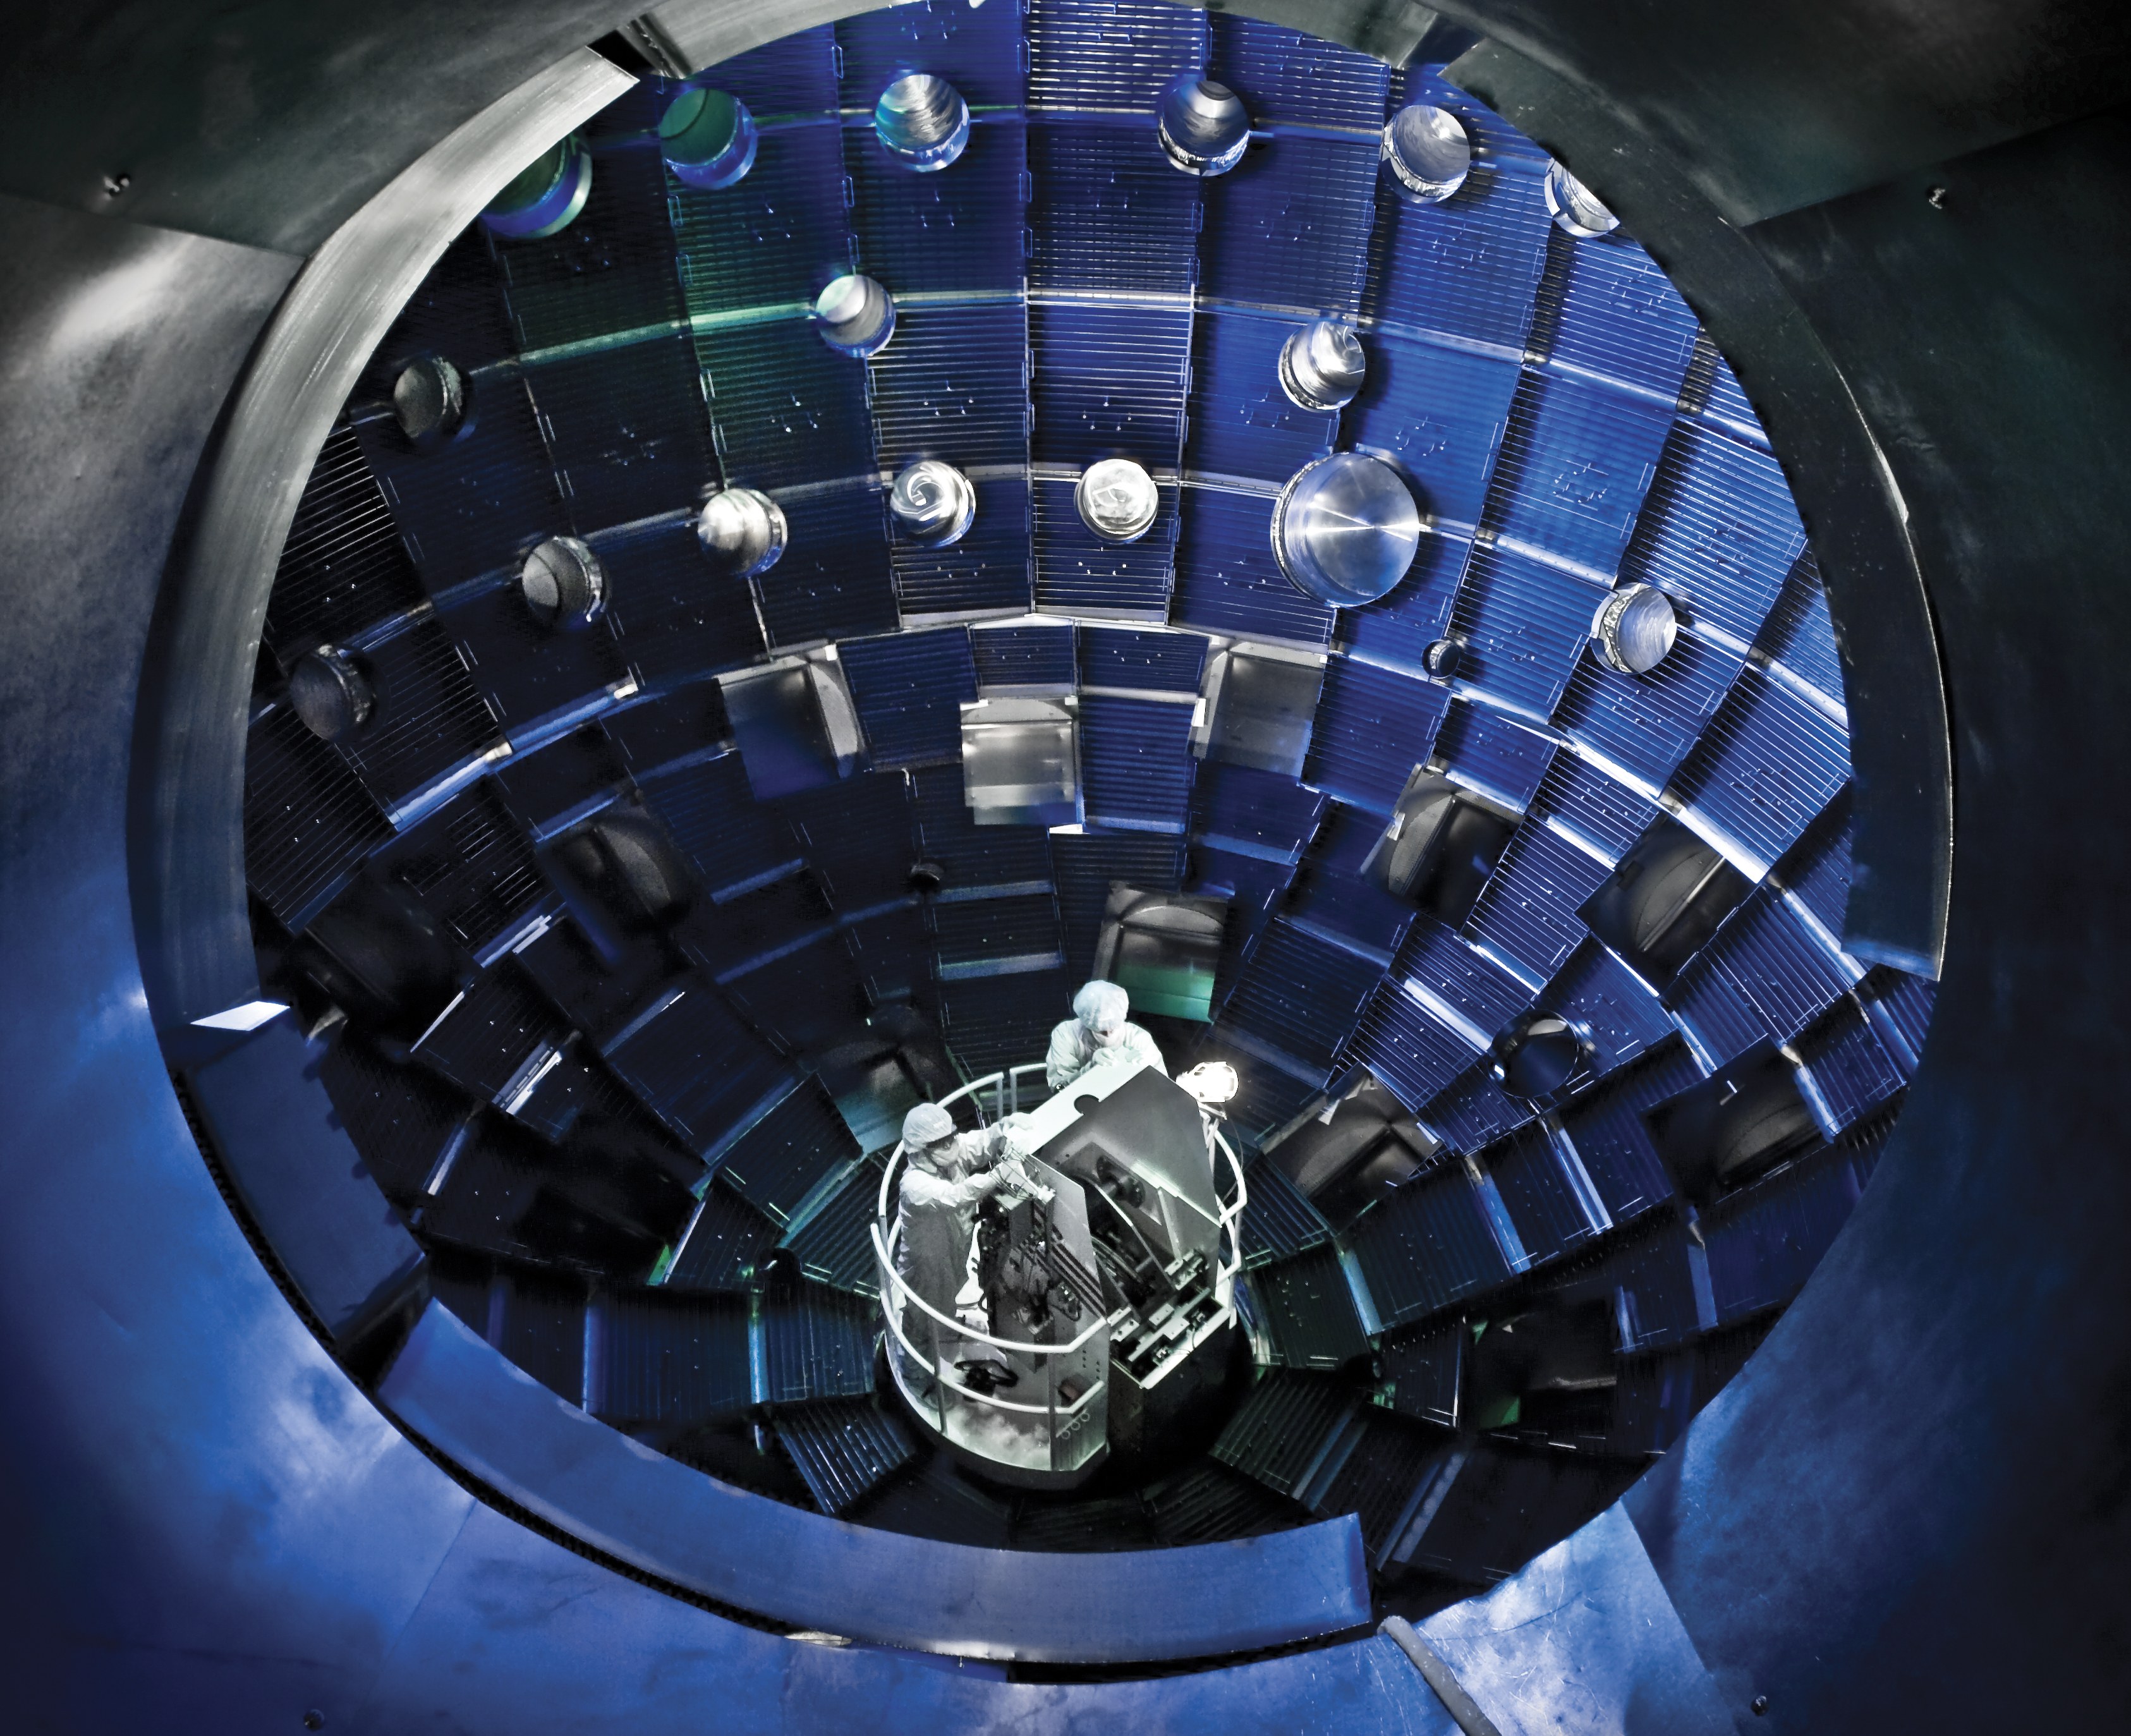 The National Ignition Facility Shows What American Science Can Do